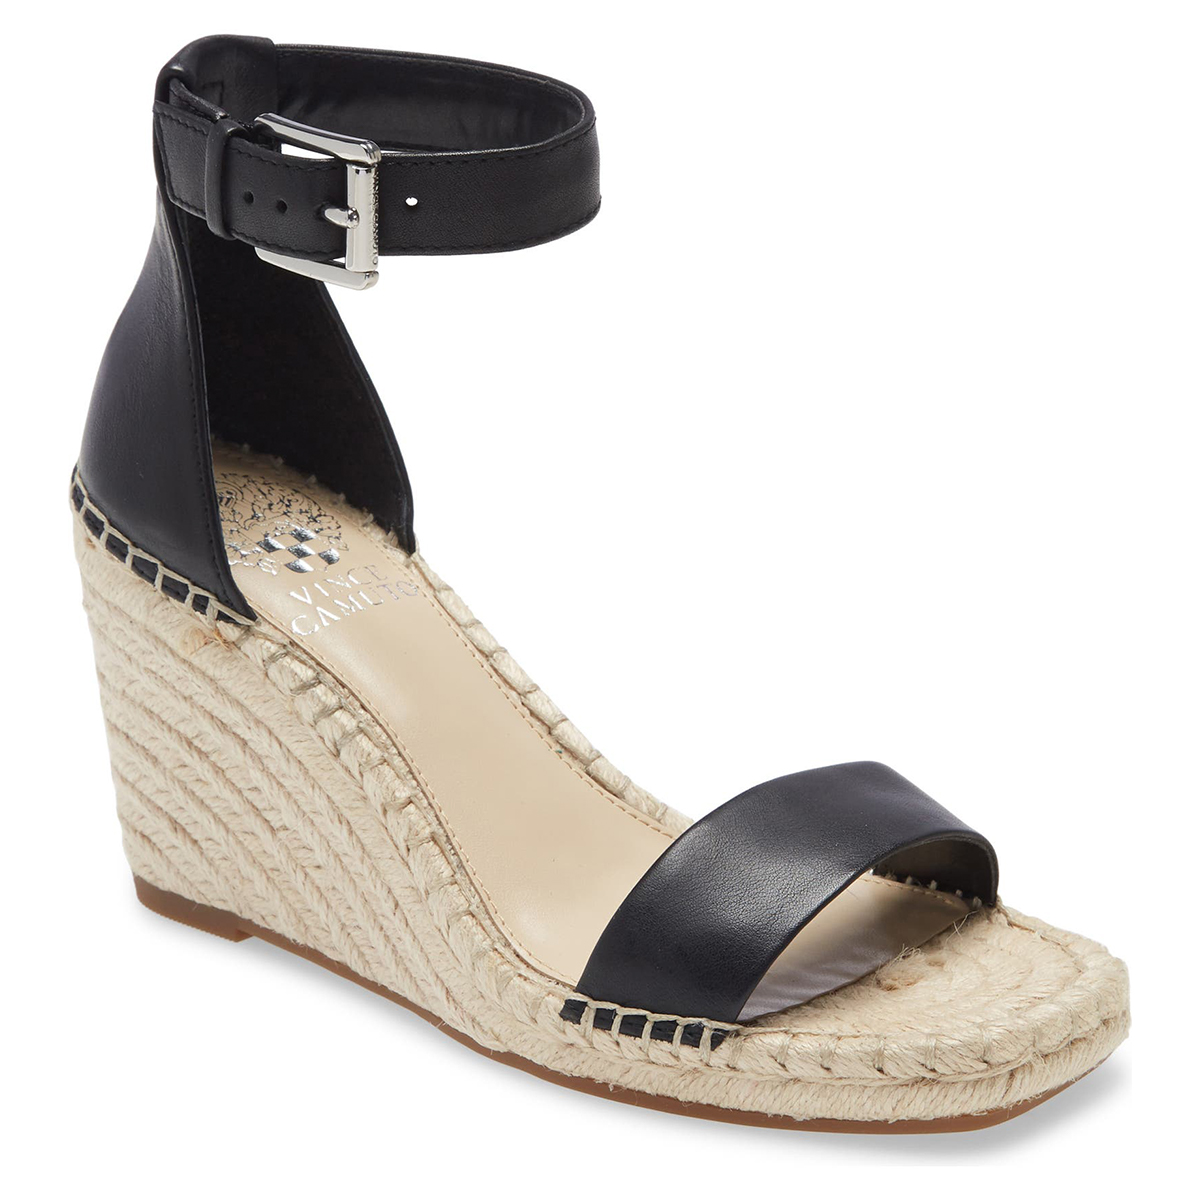 Shoes, Handbags, and Apparel From Vince Camuto | Who What Wear UK